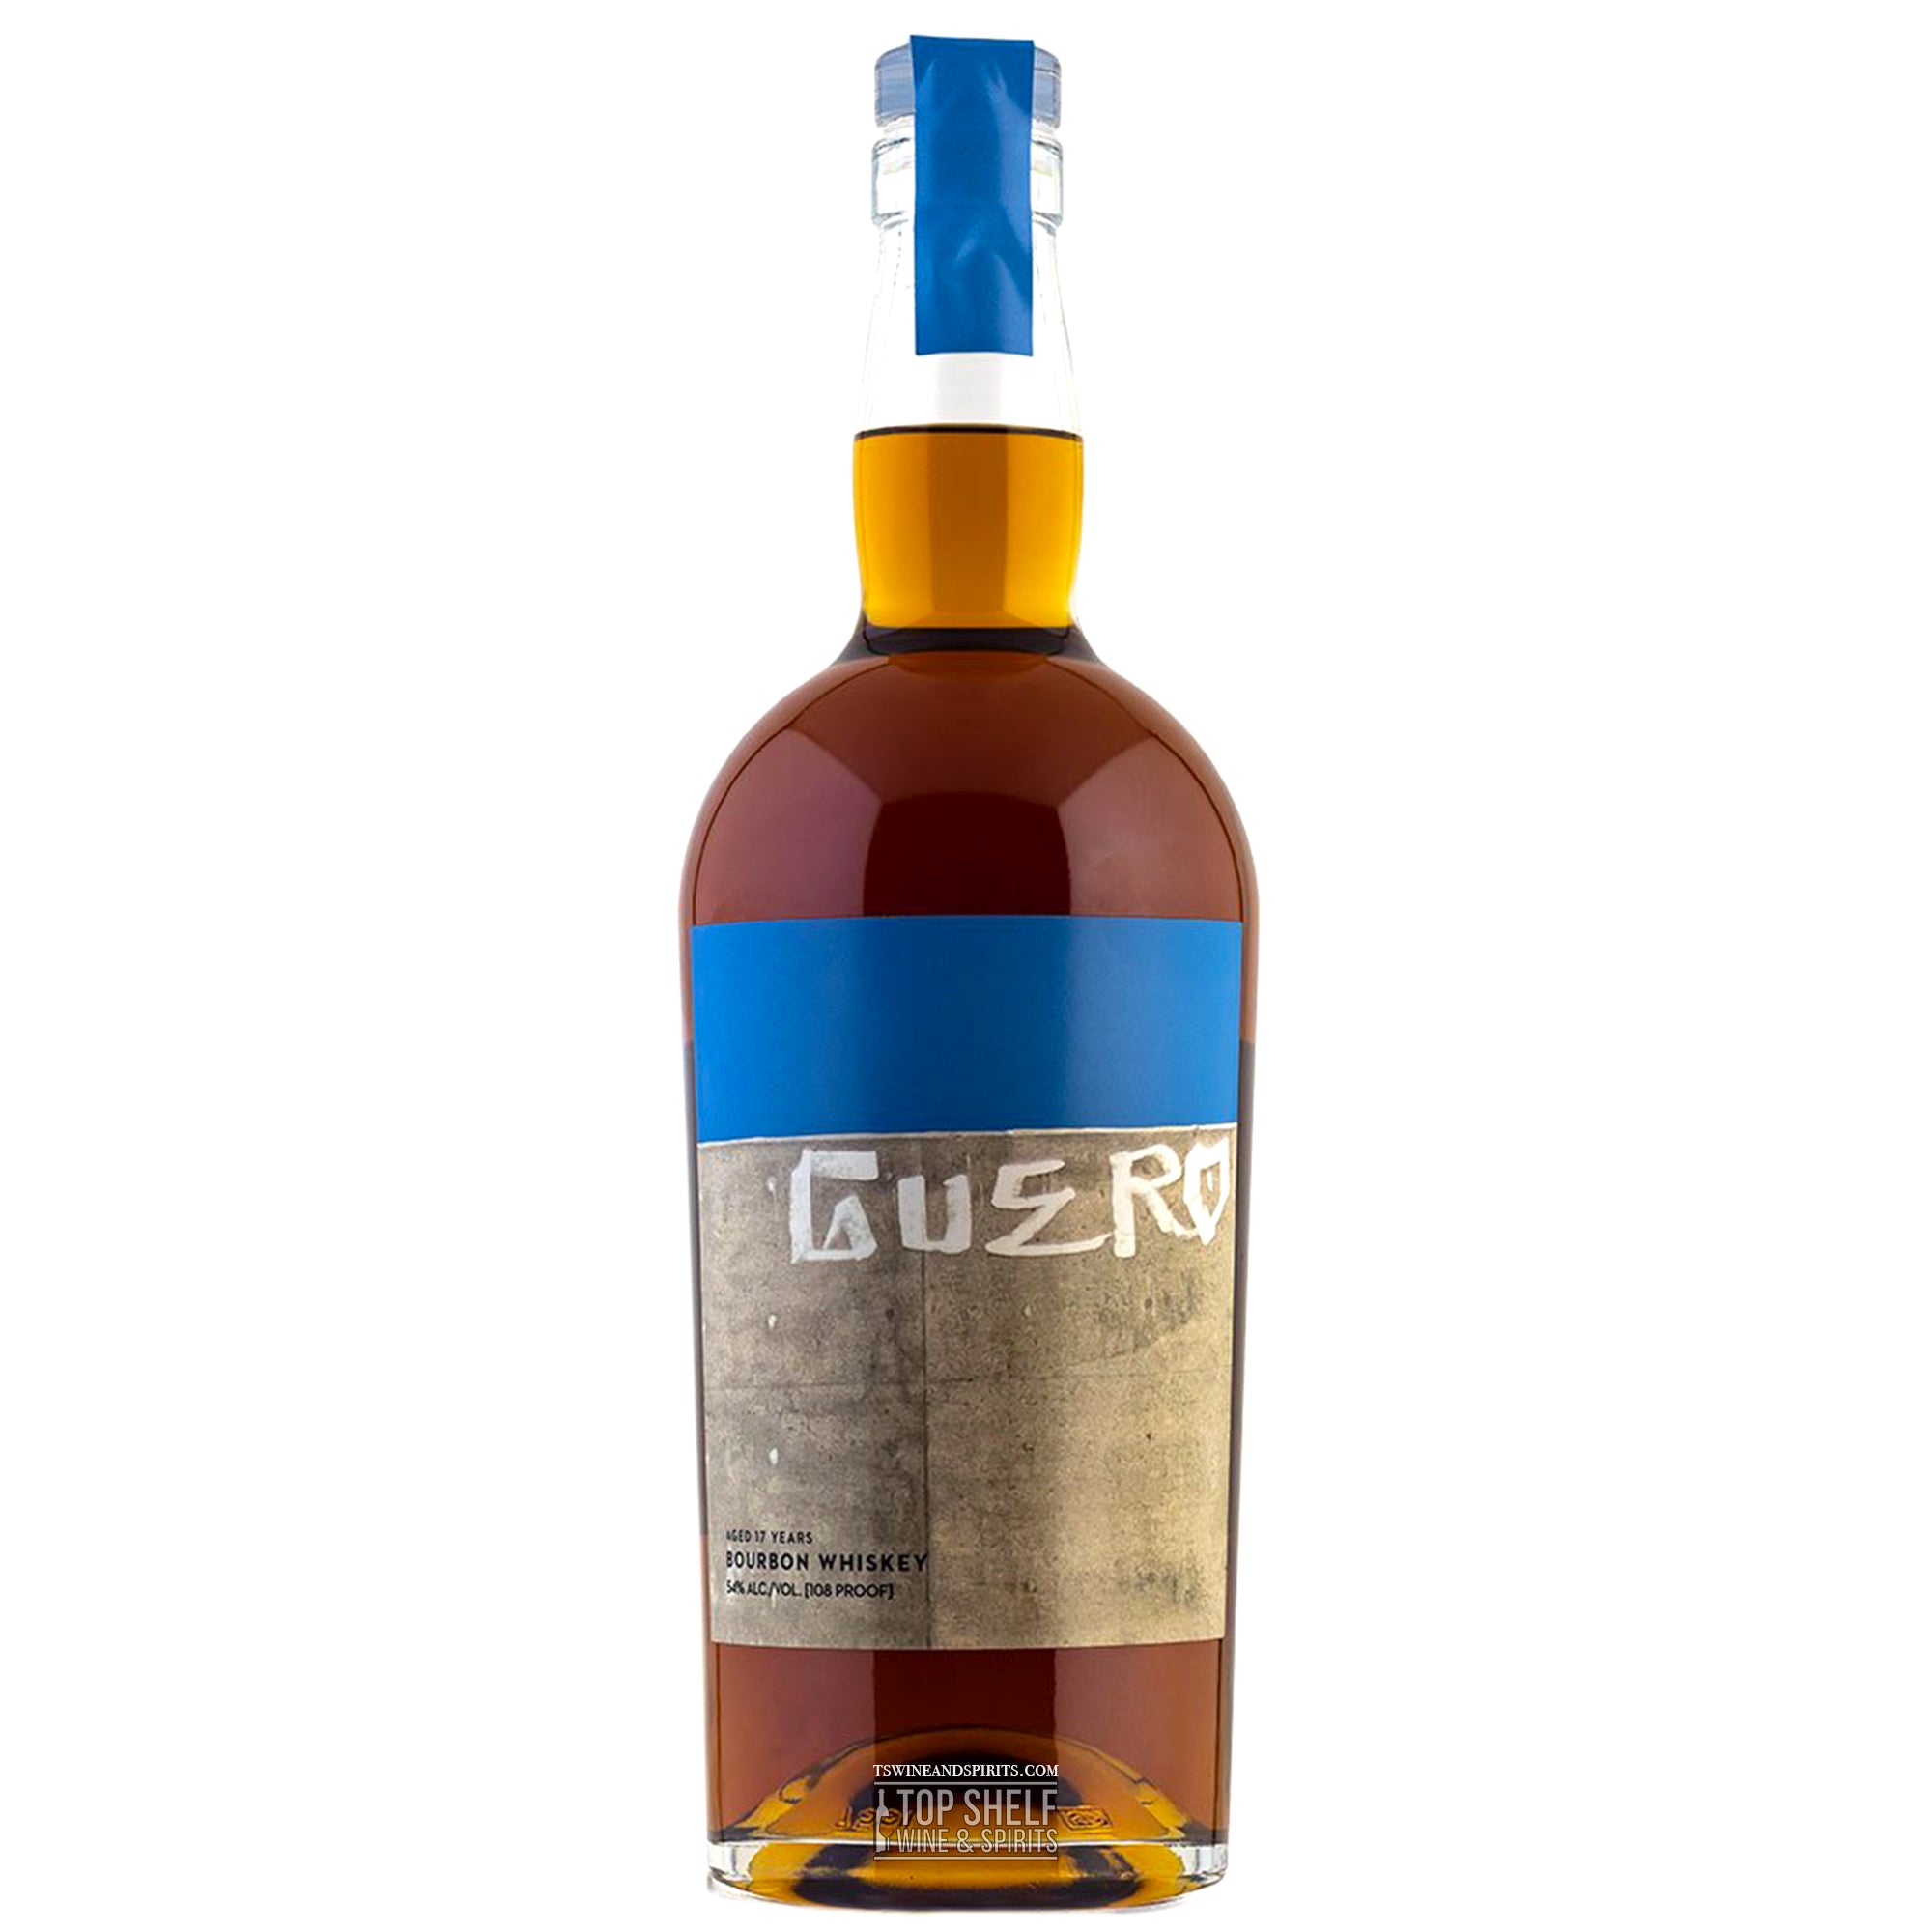 Savage and Cooke Guero 17 Year Bourbon Whiskey